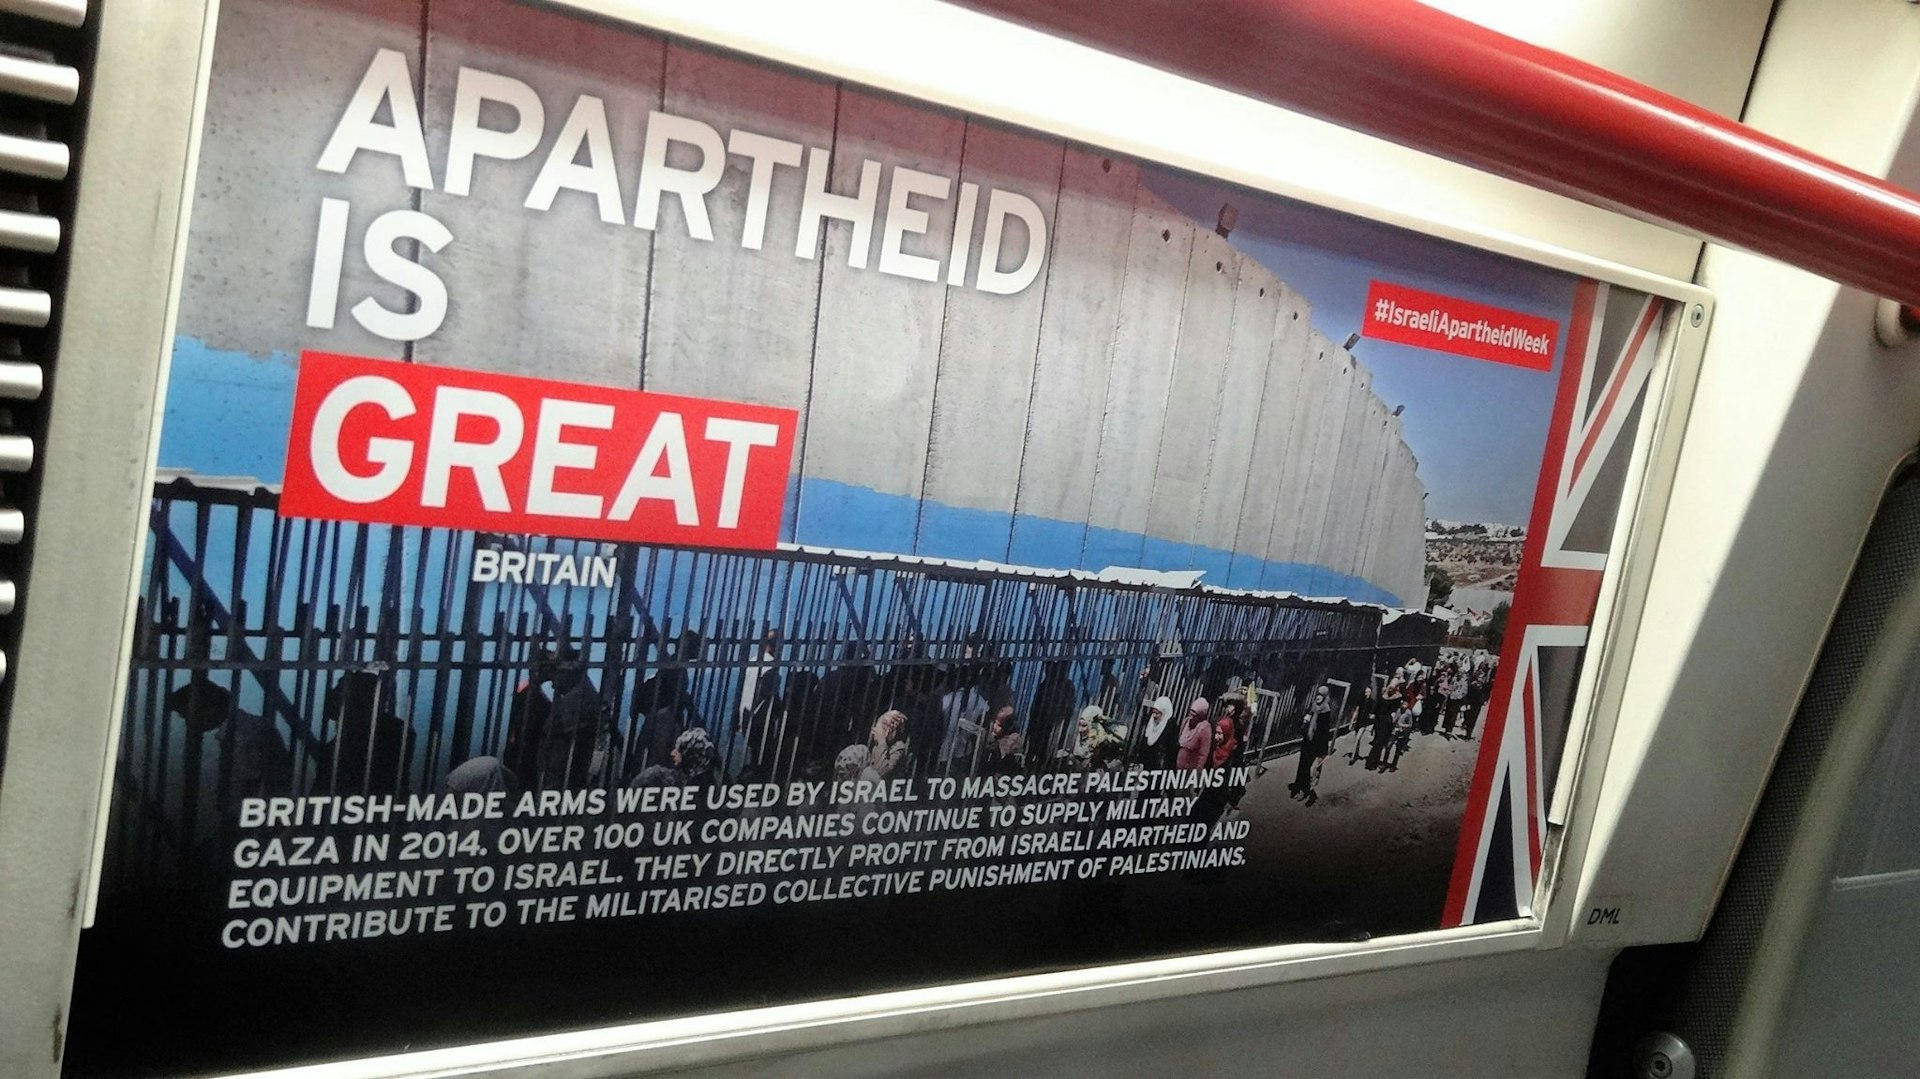 Activists highlight UK support for Israel’s illegal occupation of Palestine